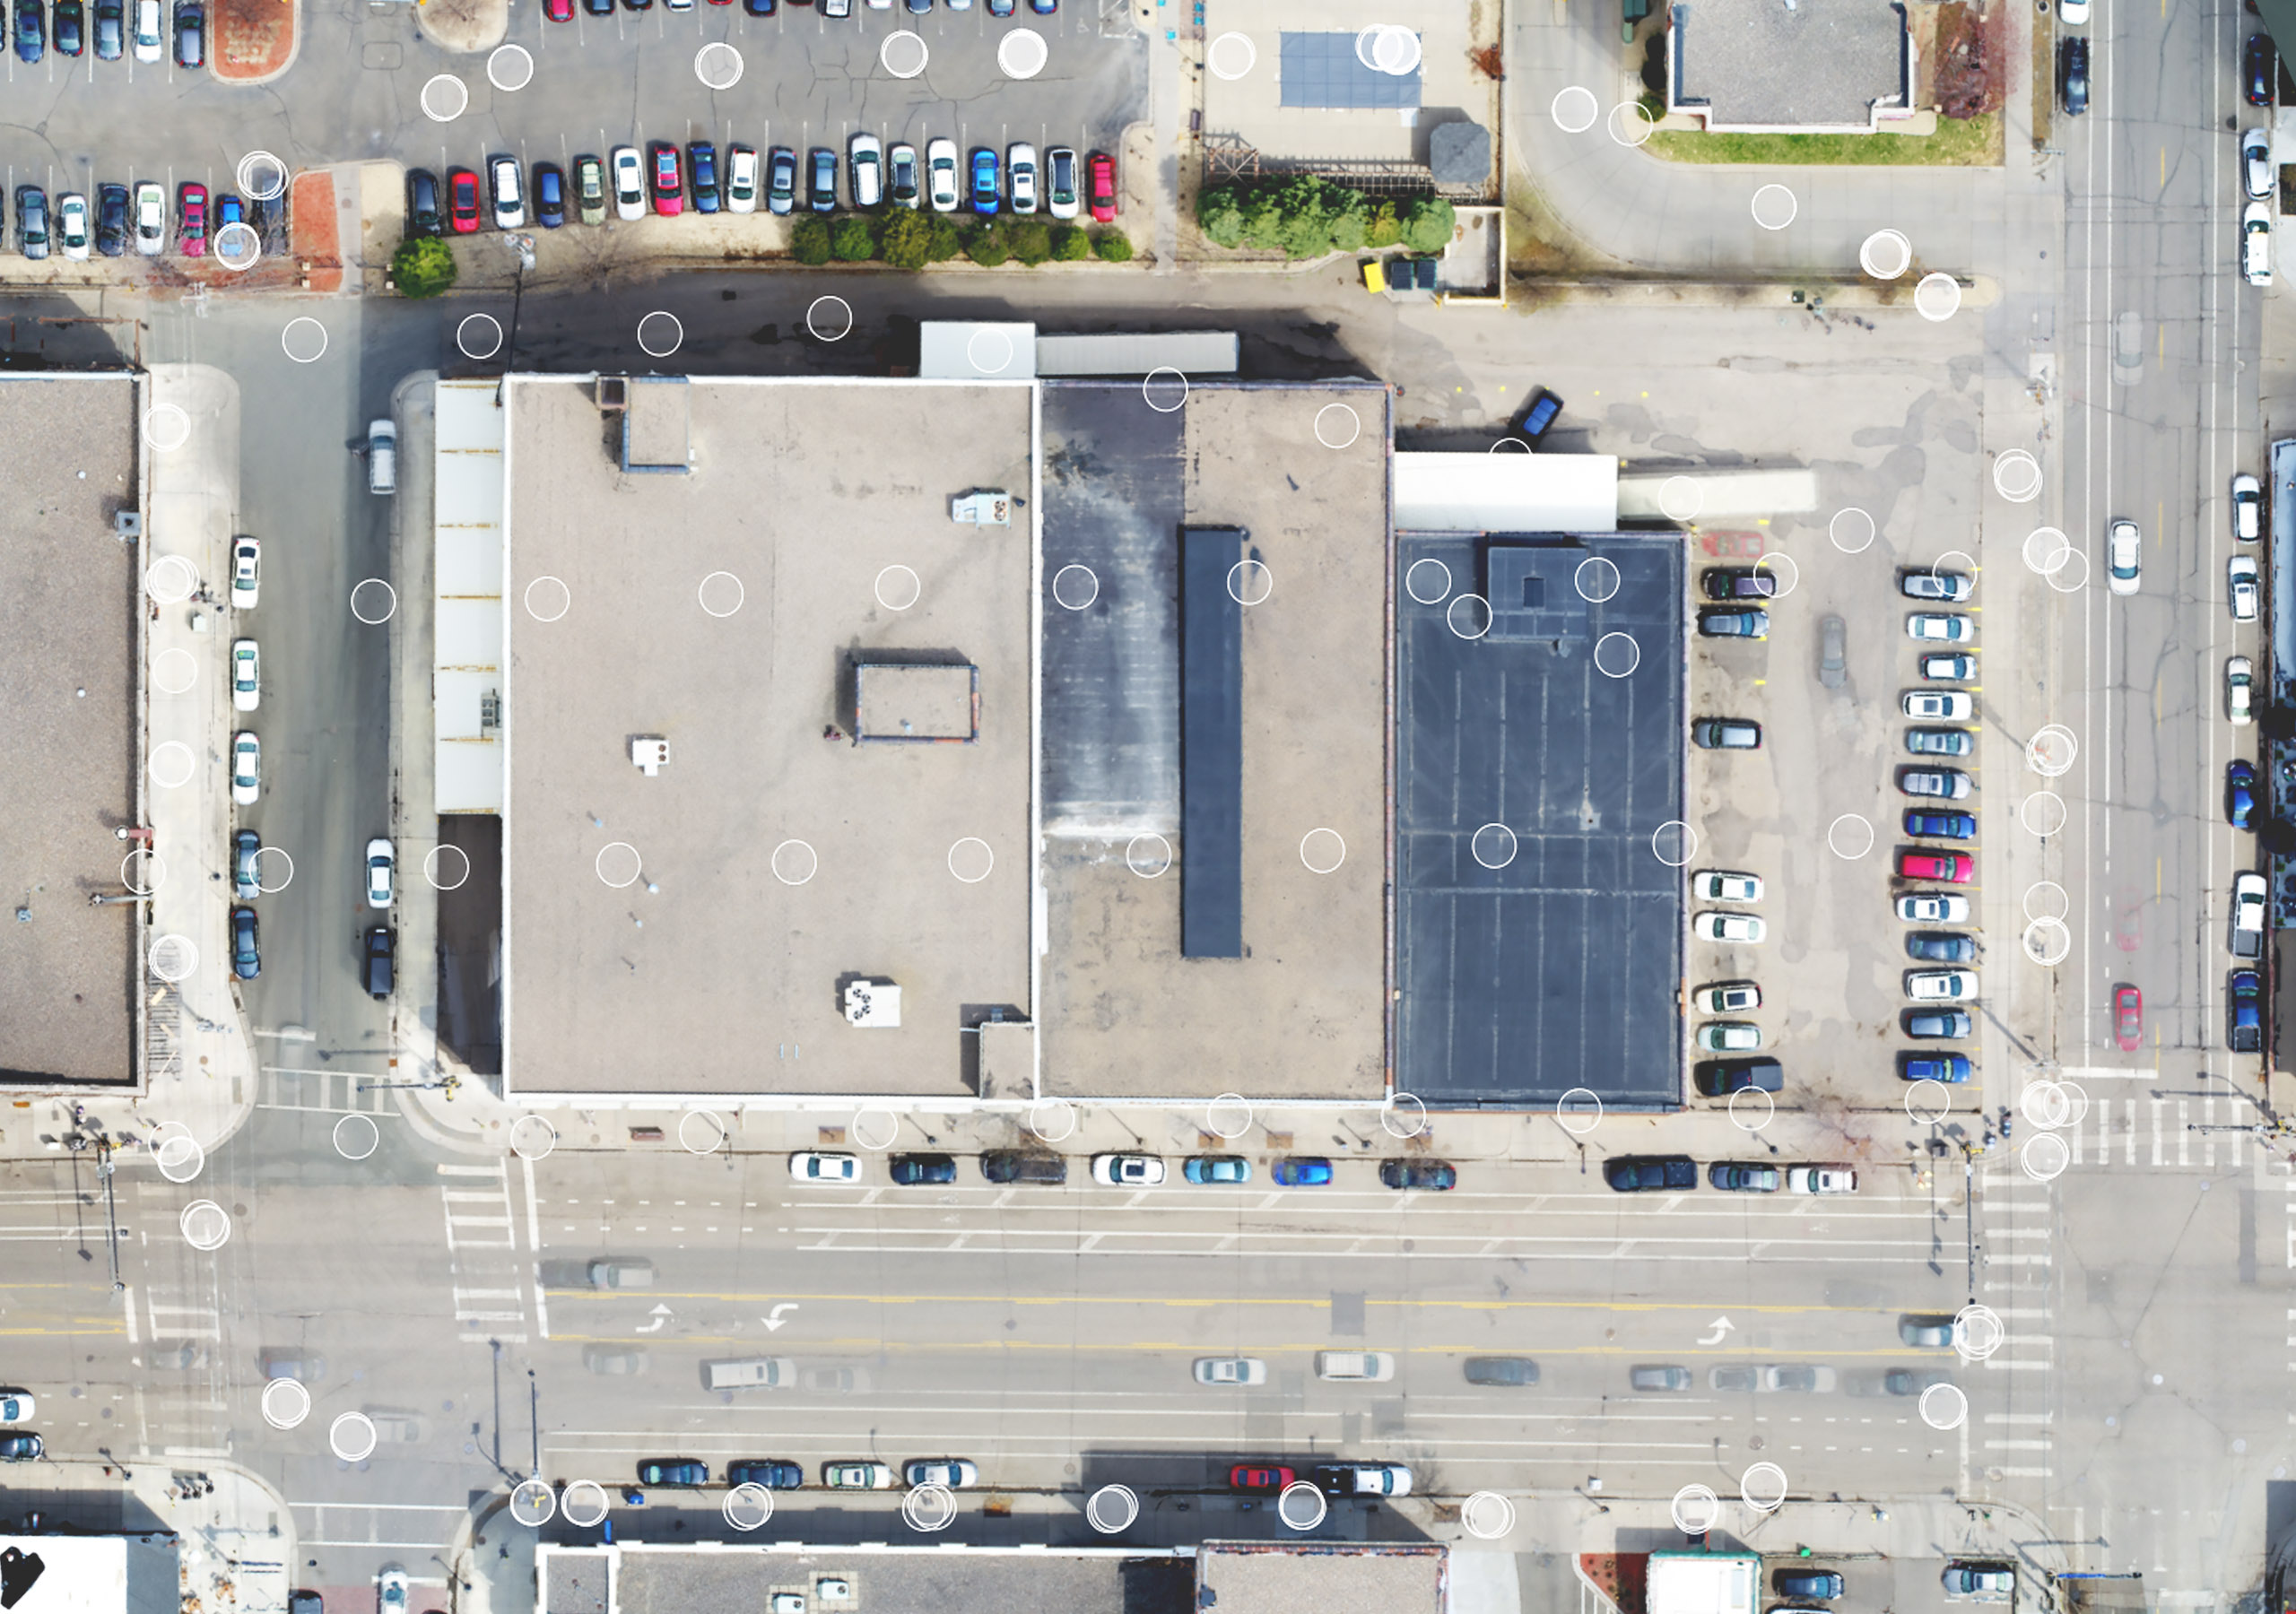 A nadir image of a commercial building on the corner of a city intersection and cars parked in two parking lots